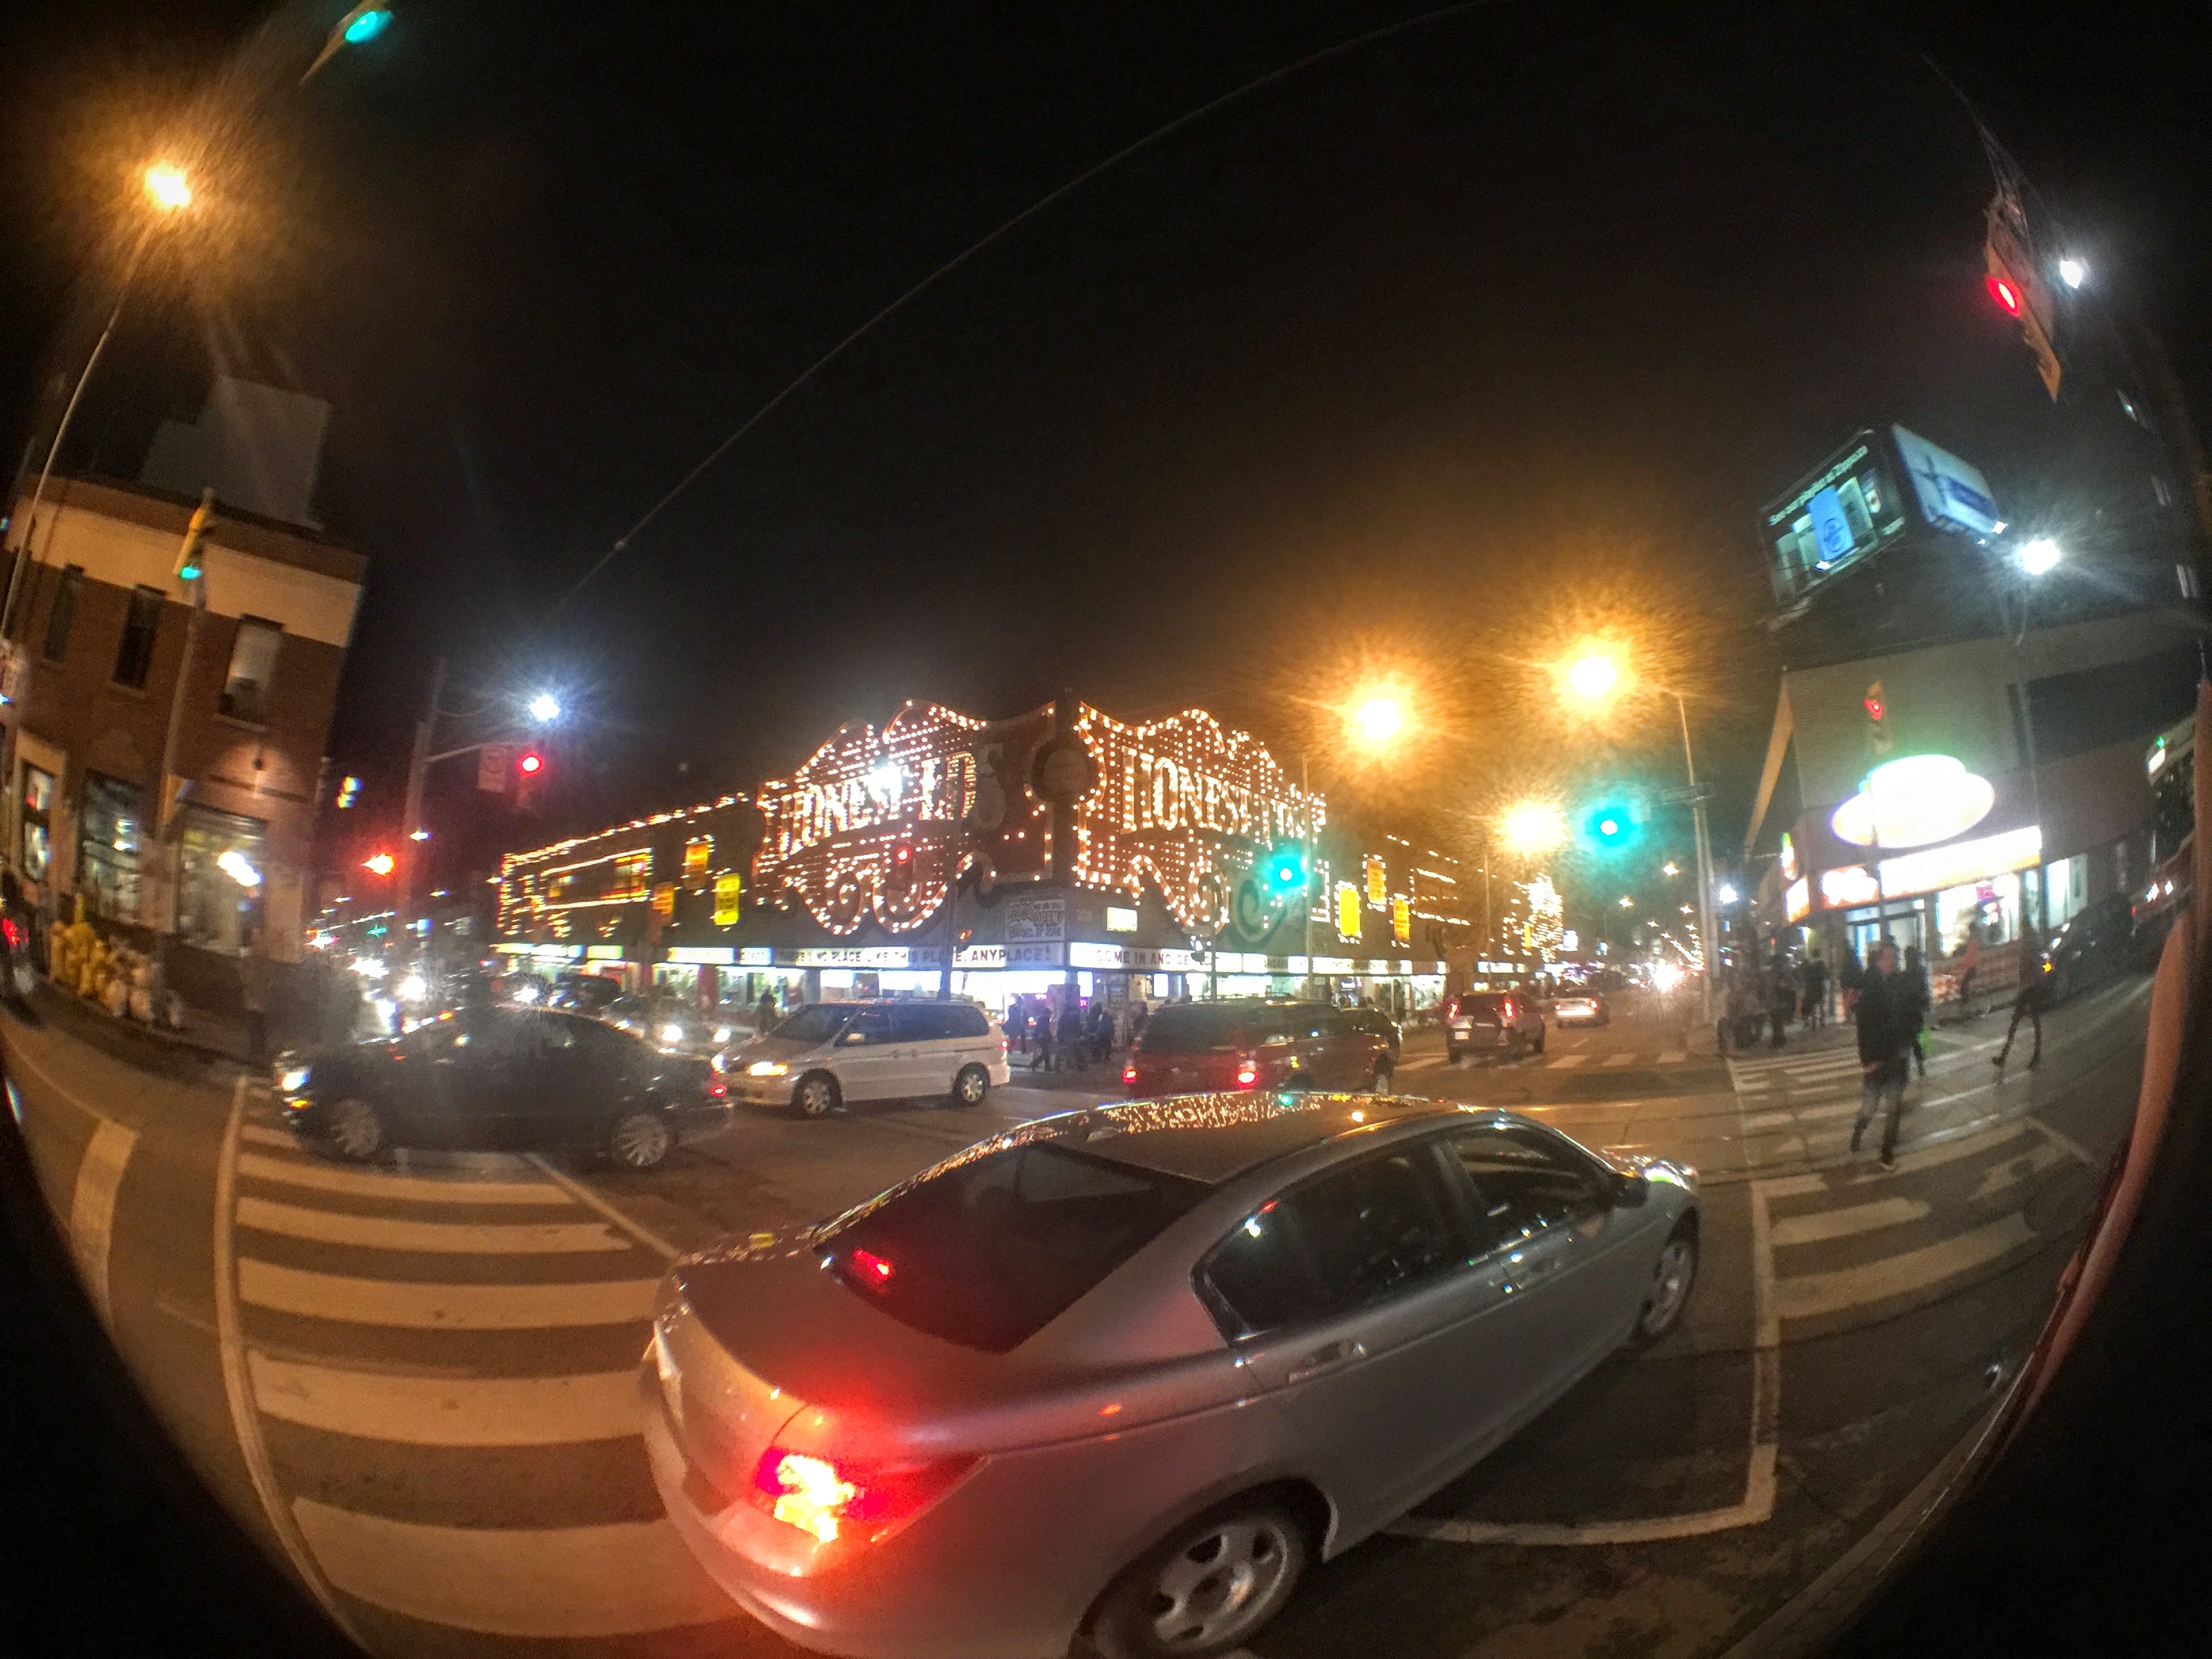 One of Toronto's more iconic (and soon to be gone) landmarks. Shot with the Olloclip's fisheye lens.